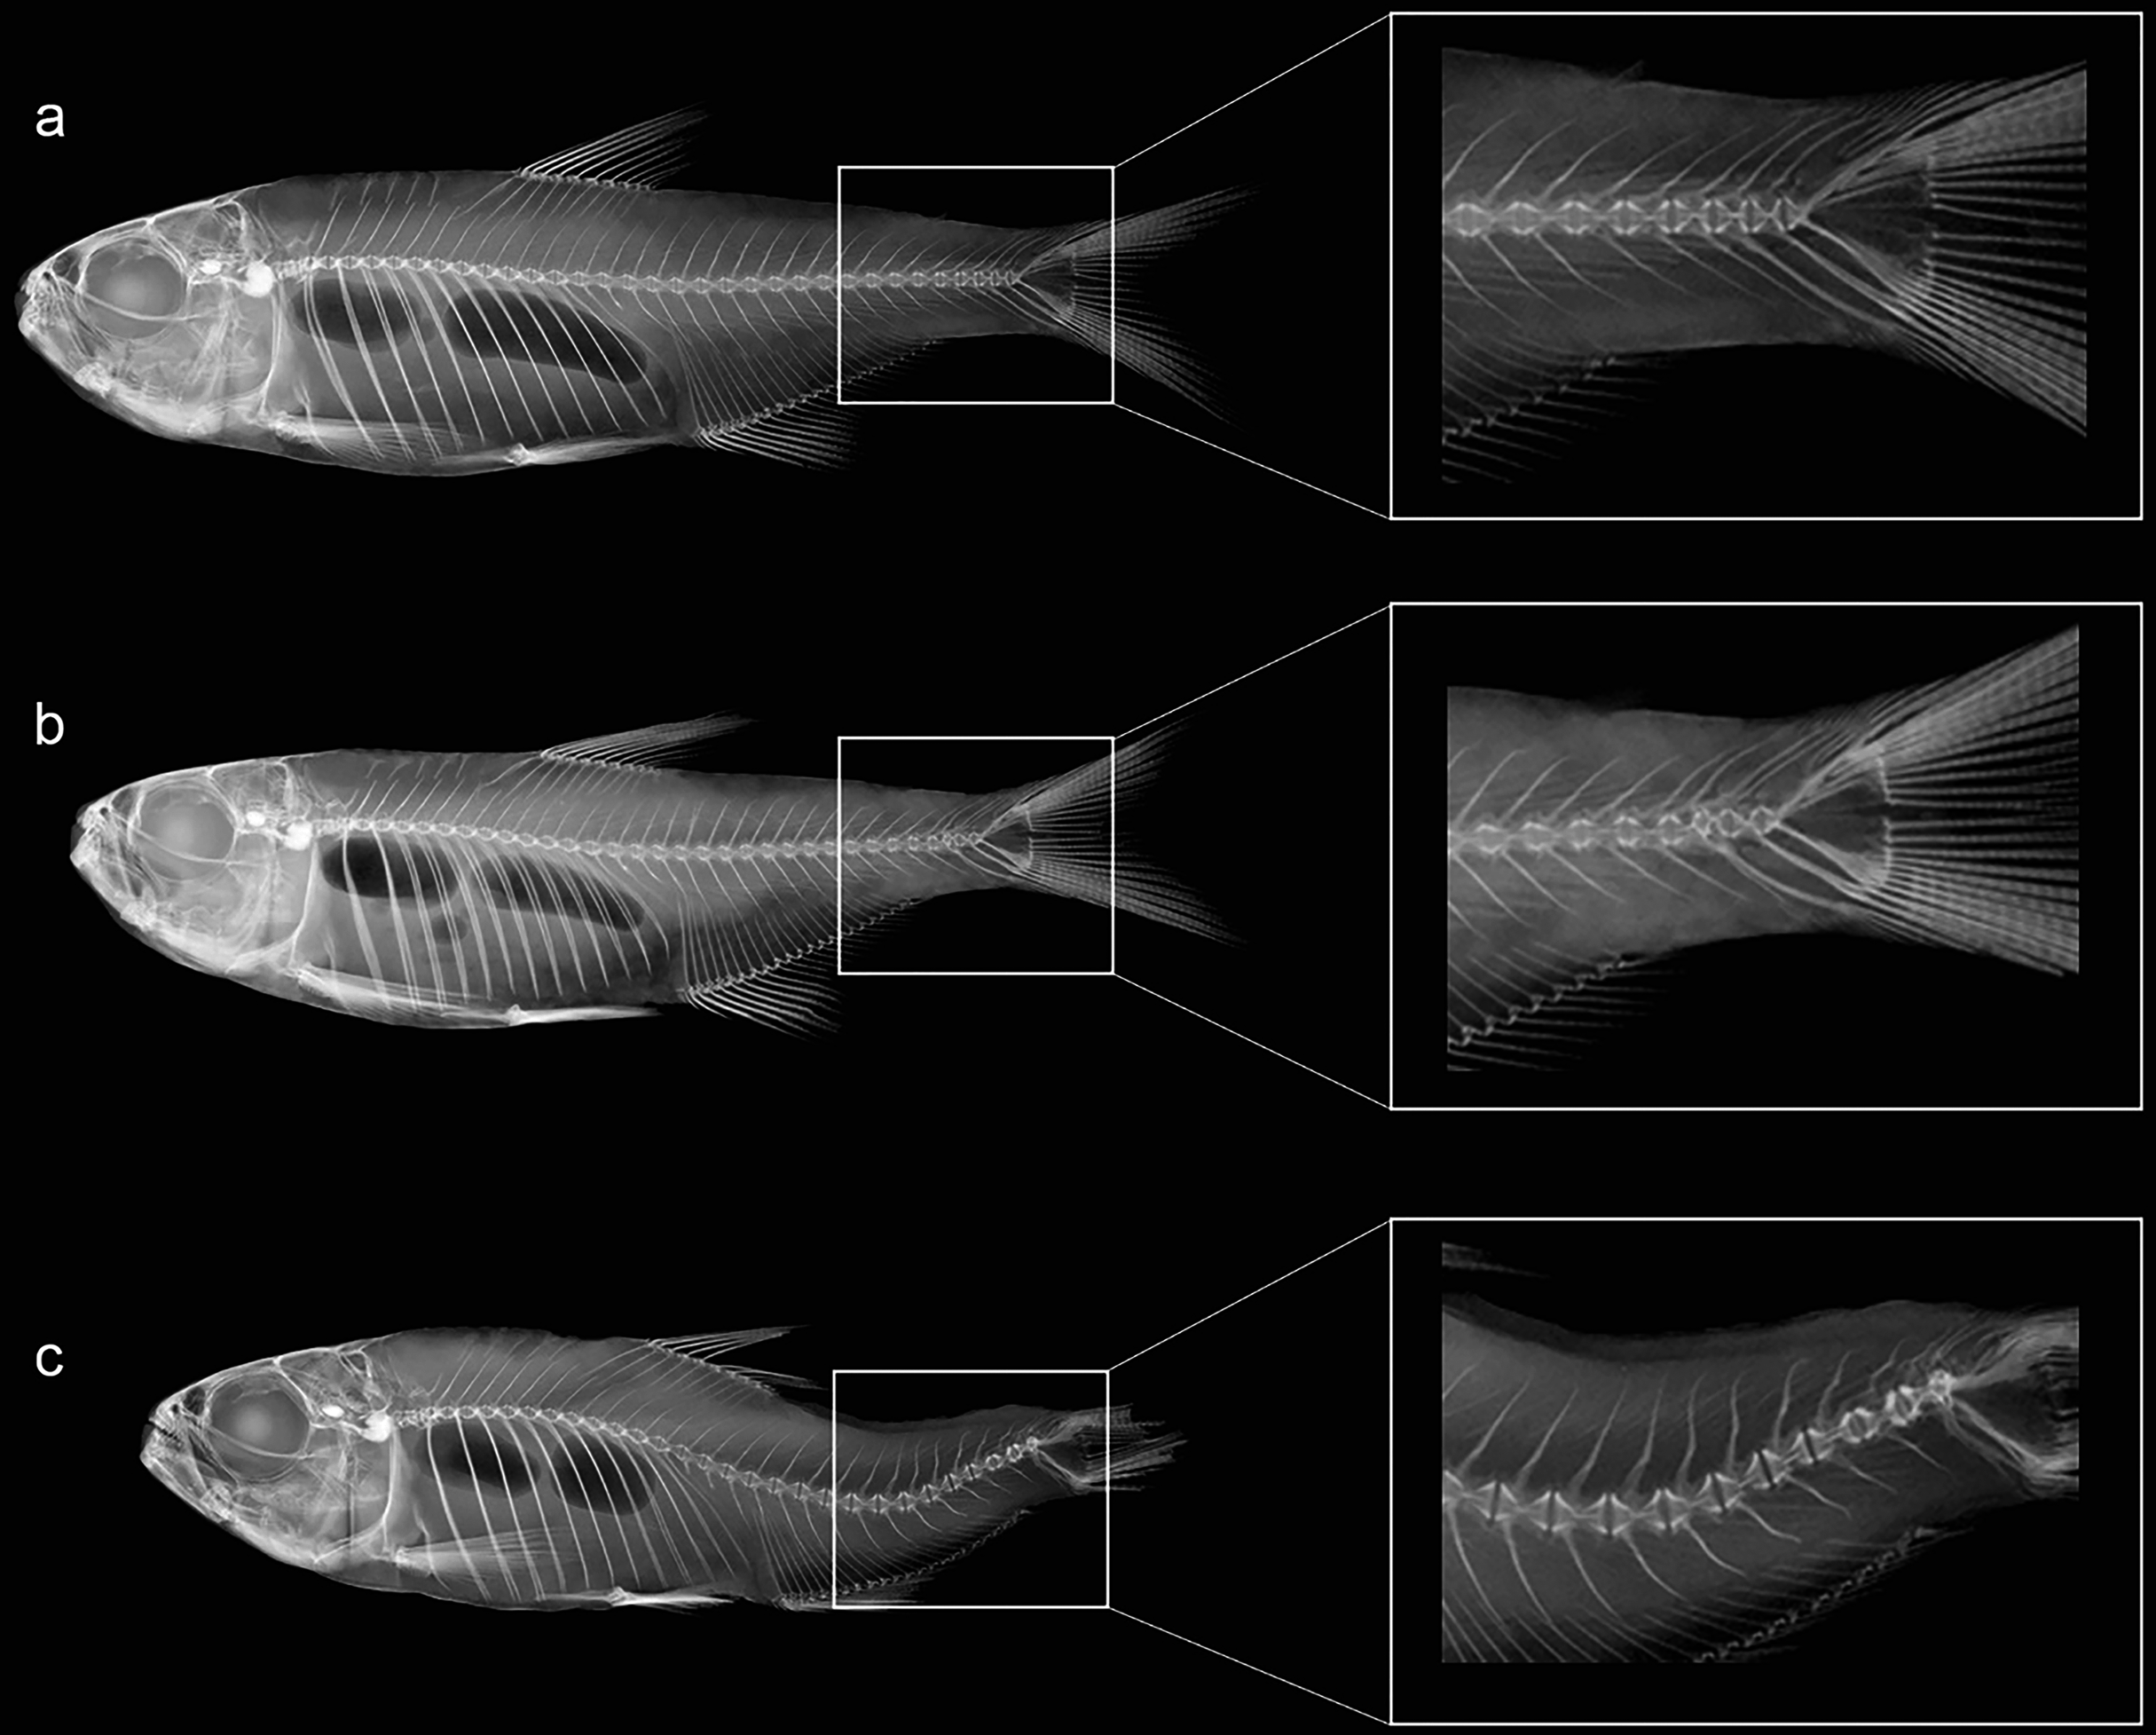 Spinal malformations in a naturally isolated Neotropical fish population  [PeerJ]